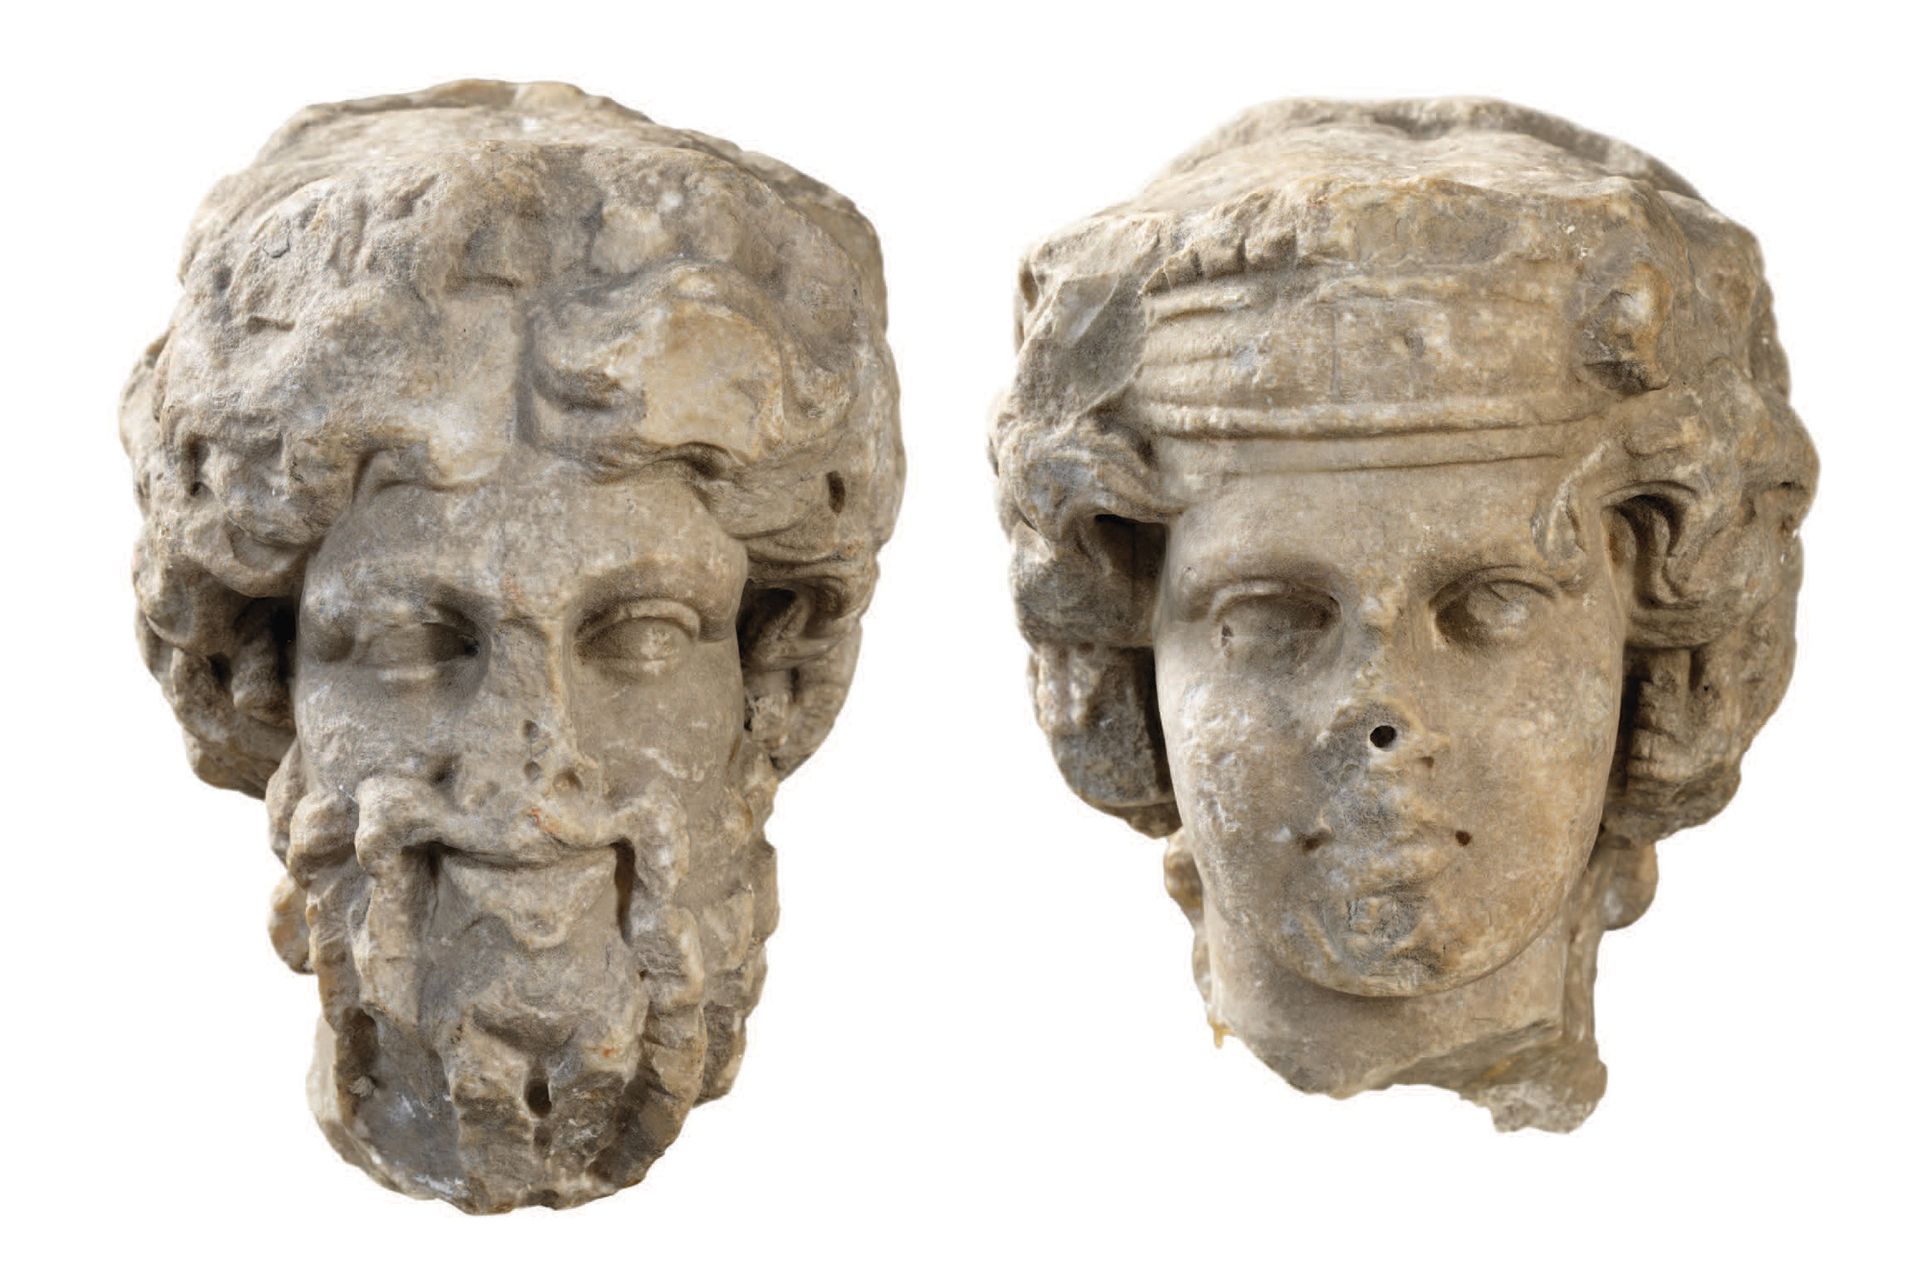 Null HEAD OF JANUS Roman period
Marble
H. 36 cm, D. 20 cm
Accidents
This marble &hellip;